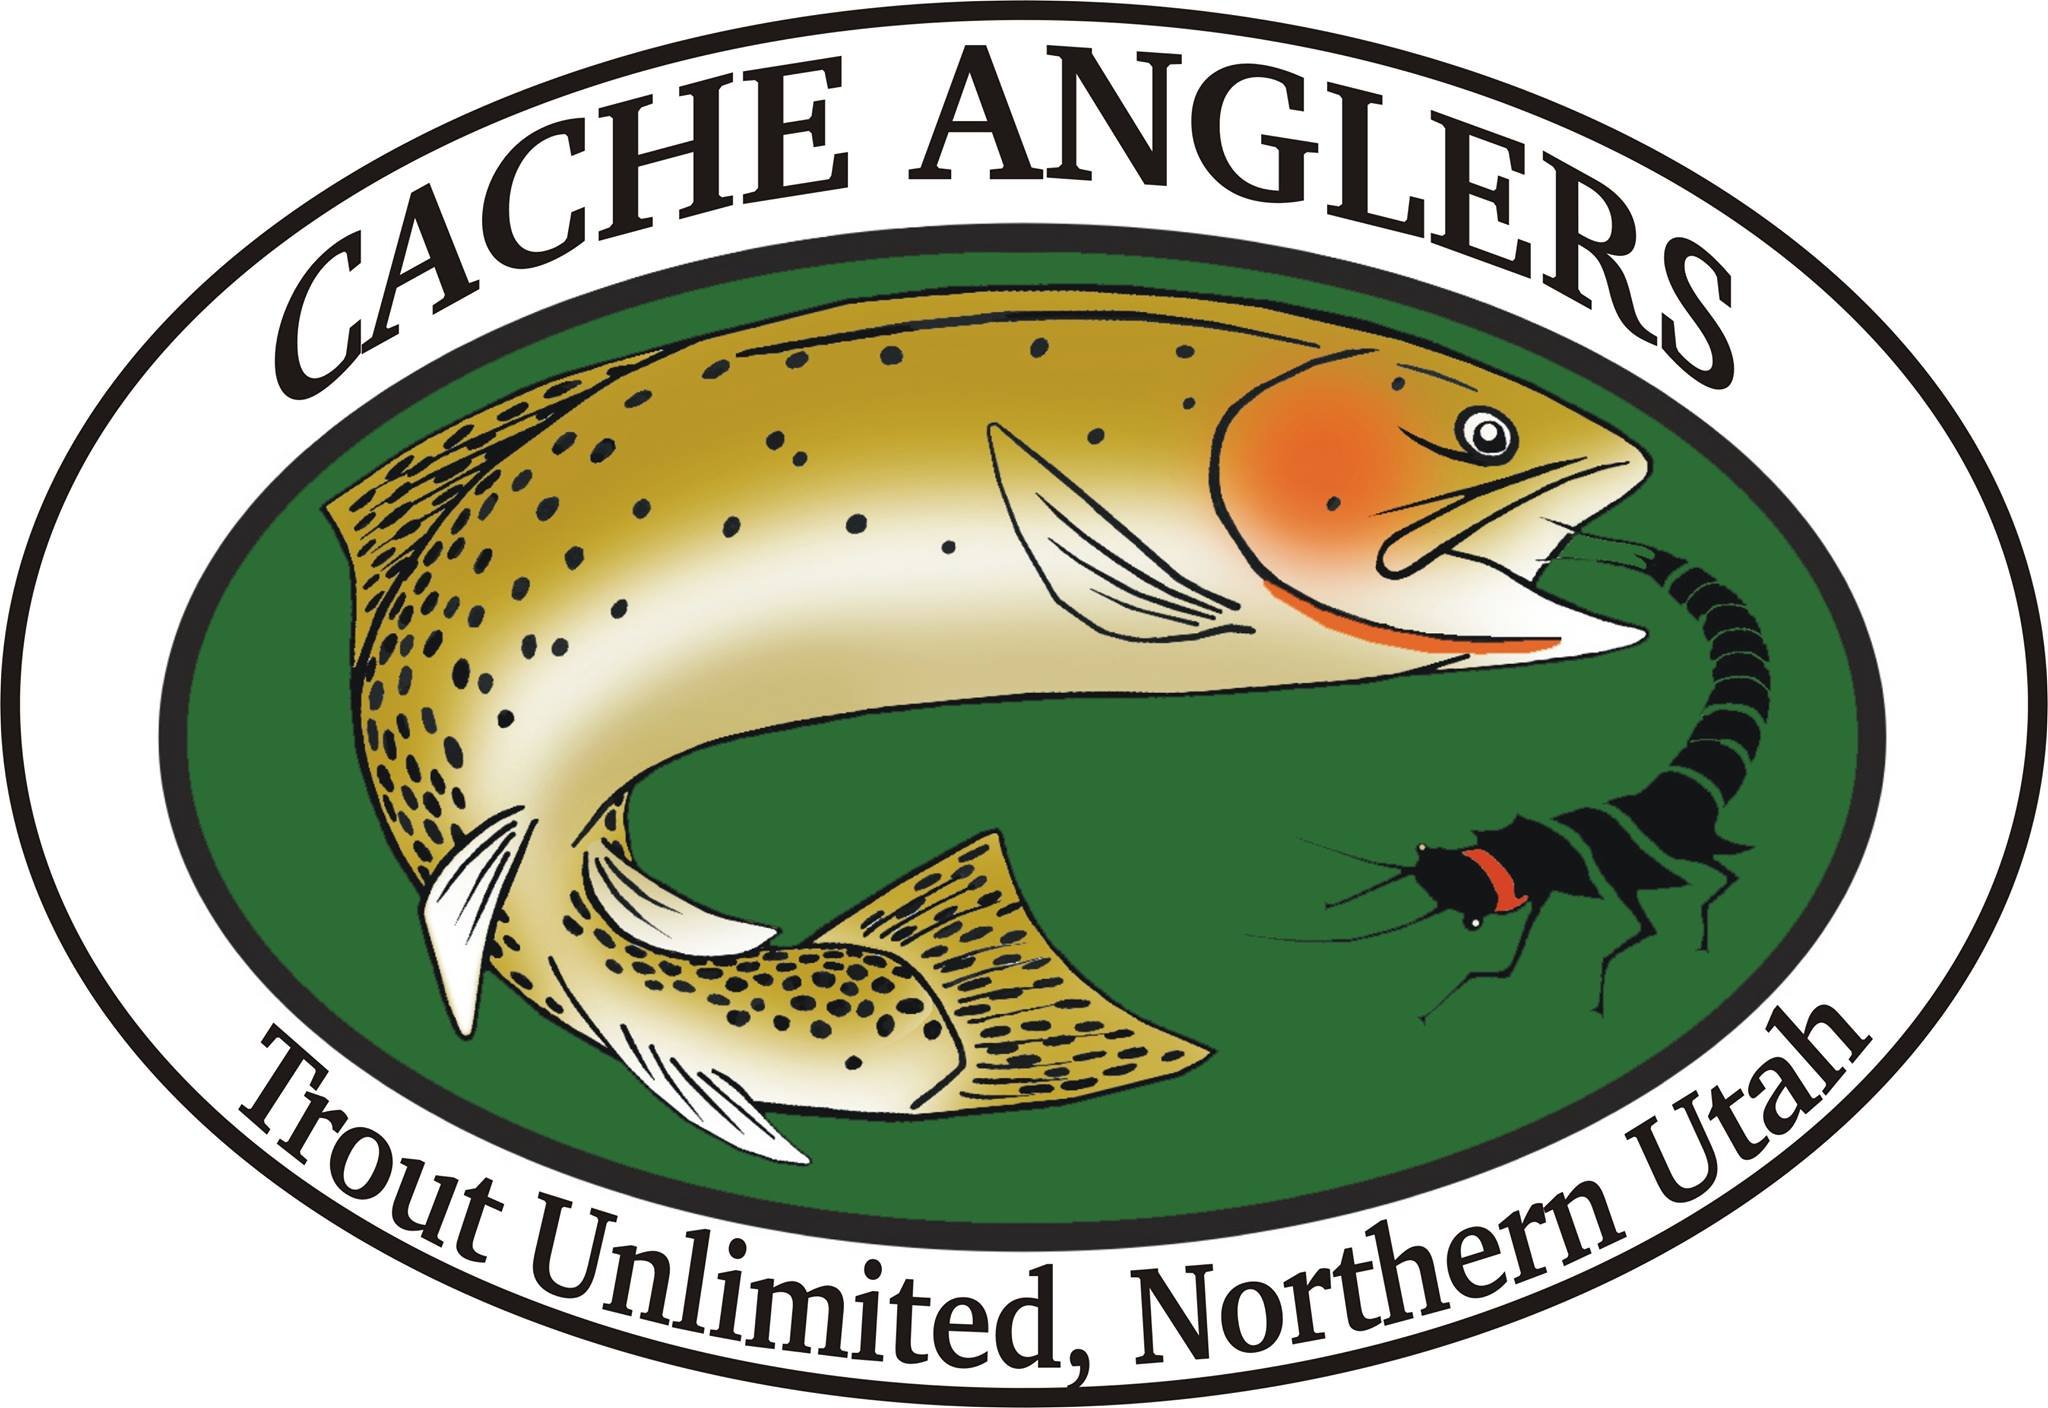 We are a group of Anglers dedicated to the preservation and perpetuation of the Fishing tradition of Cache Valley and around the world.
#cacheanglers